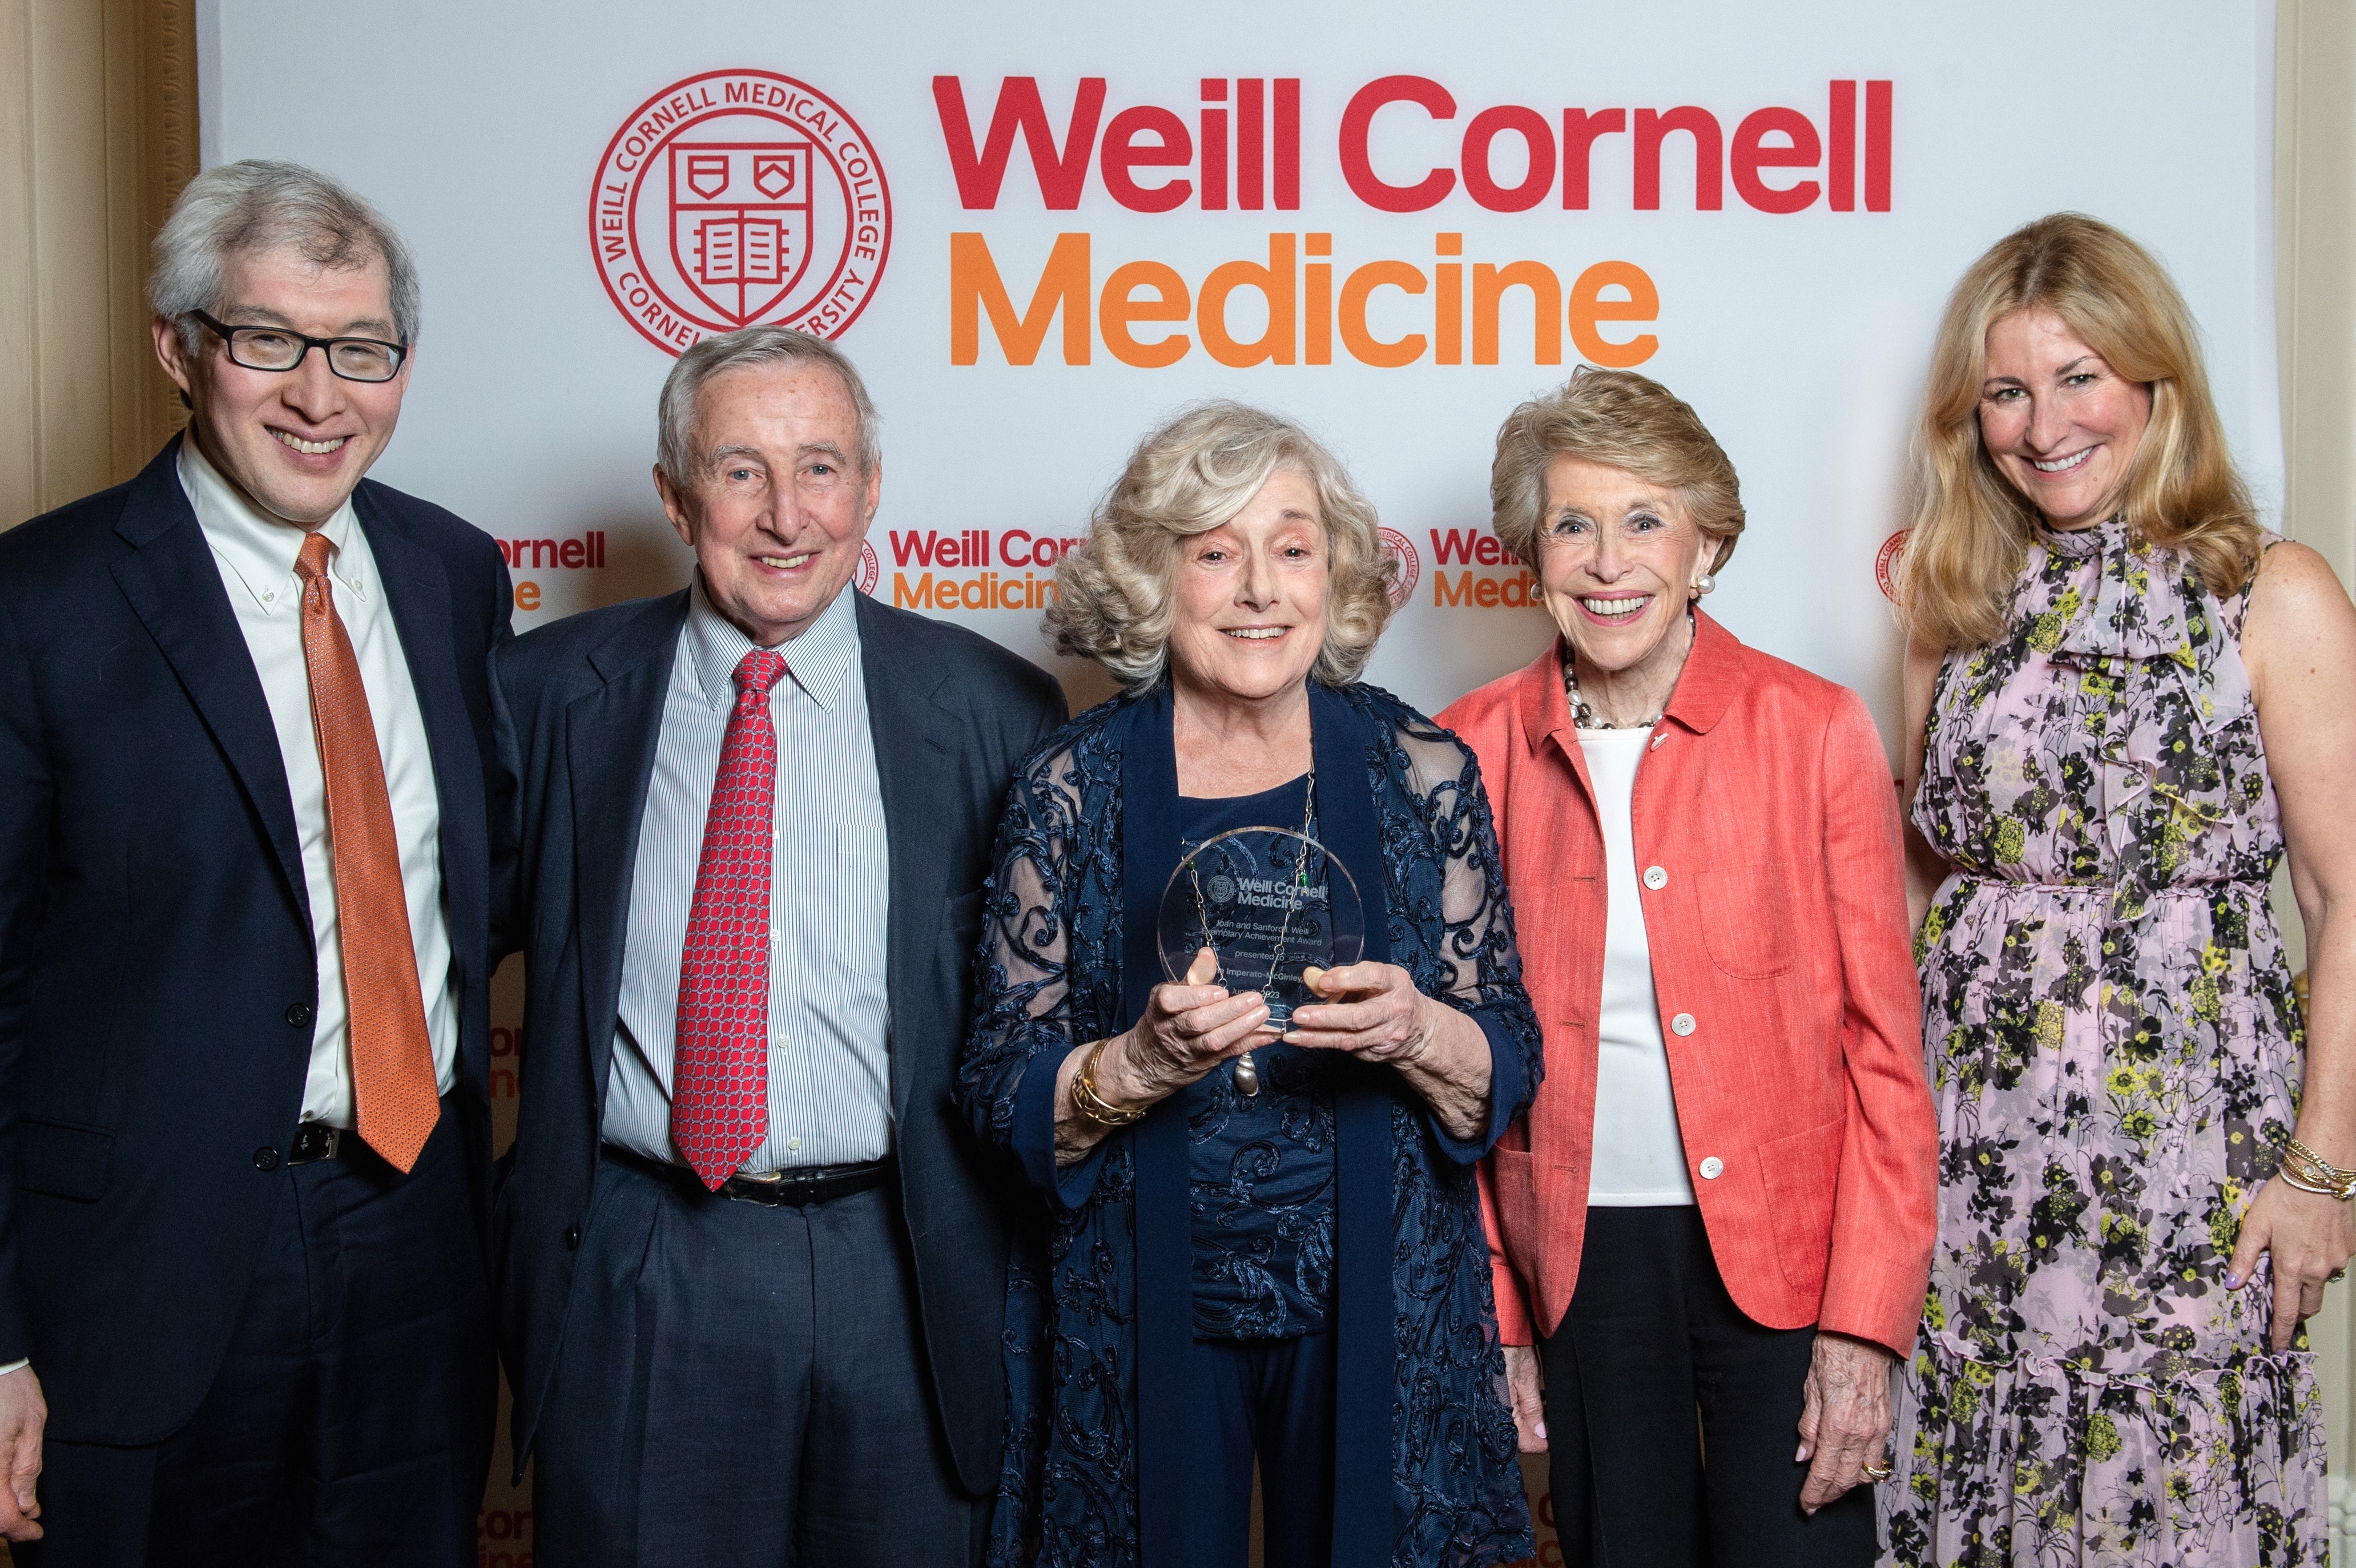 Five people pose for a group shot behind a Weill Cornell Medicine backdrop